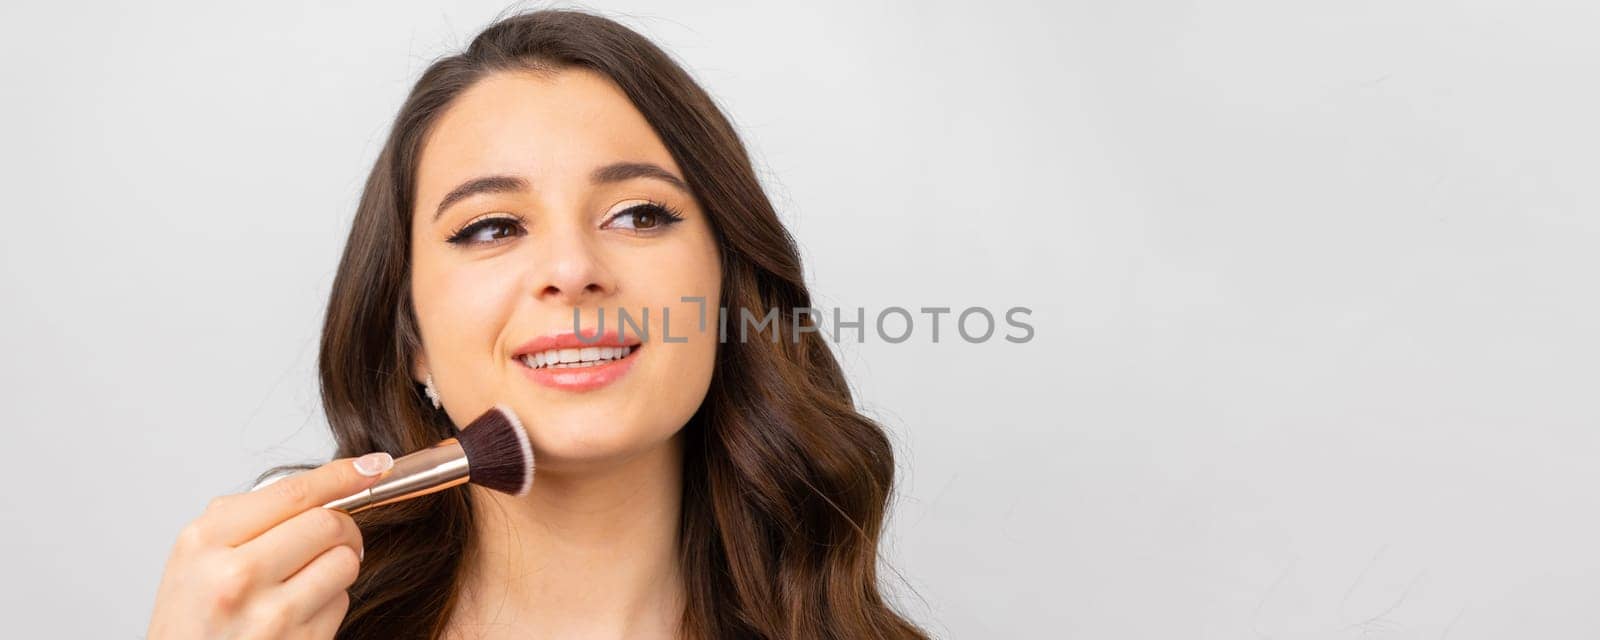 Young woman with perfect skin holding makeup brush near her face on the grey background with copy space